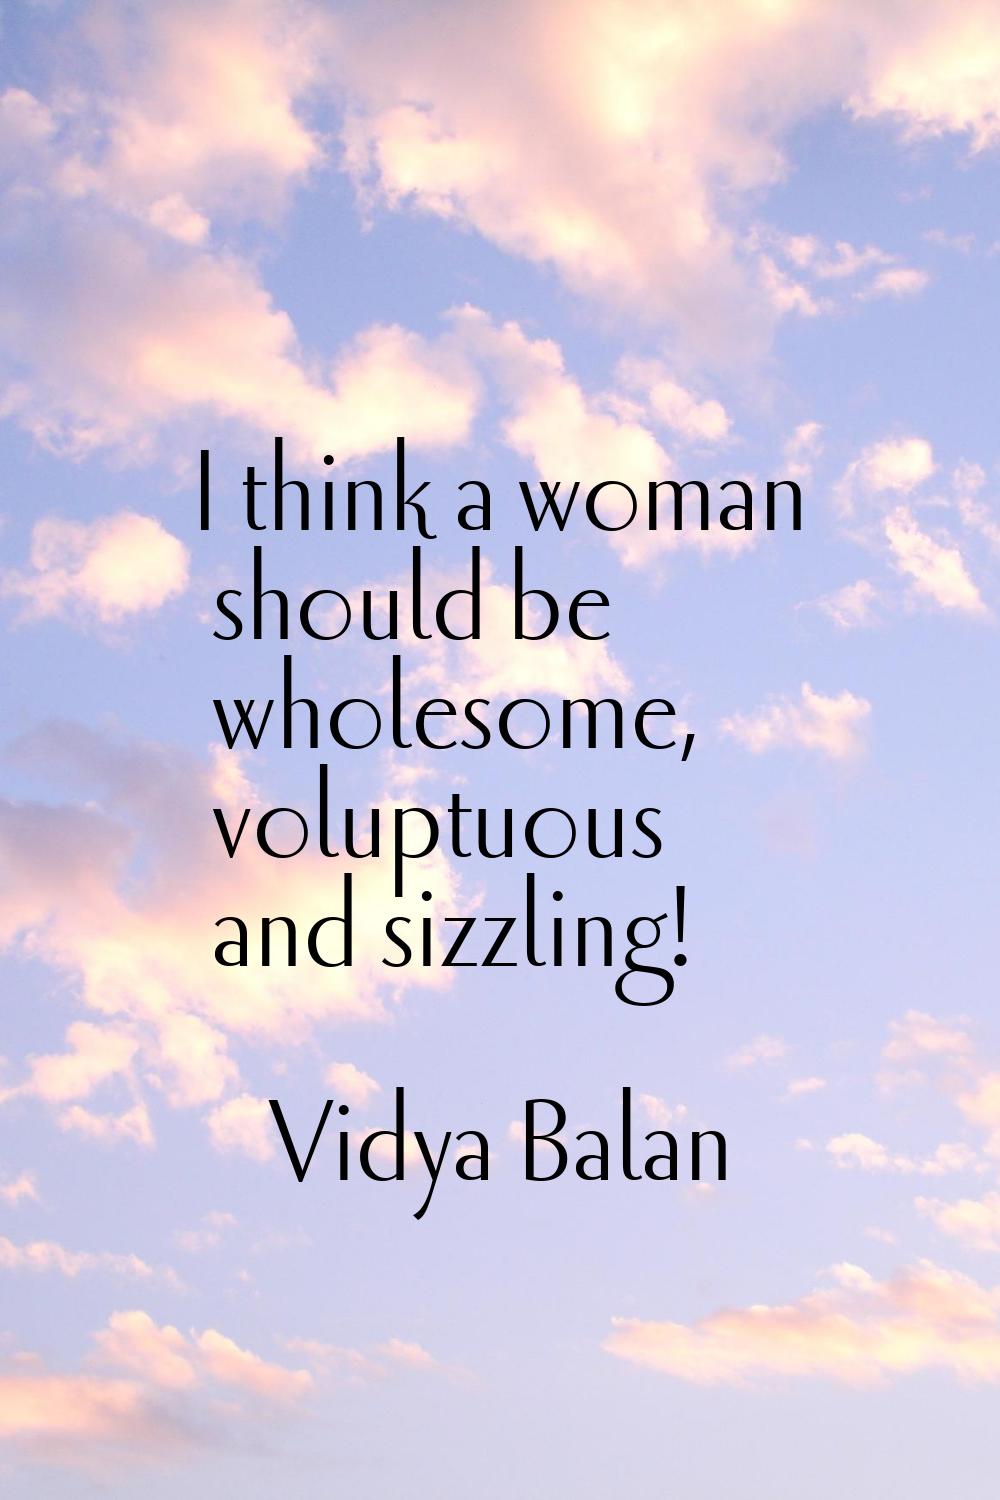 I think a woman should be wholesome, voluptuous and sizzling!